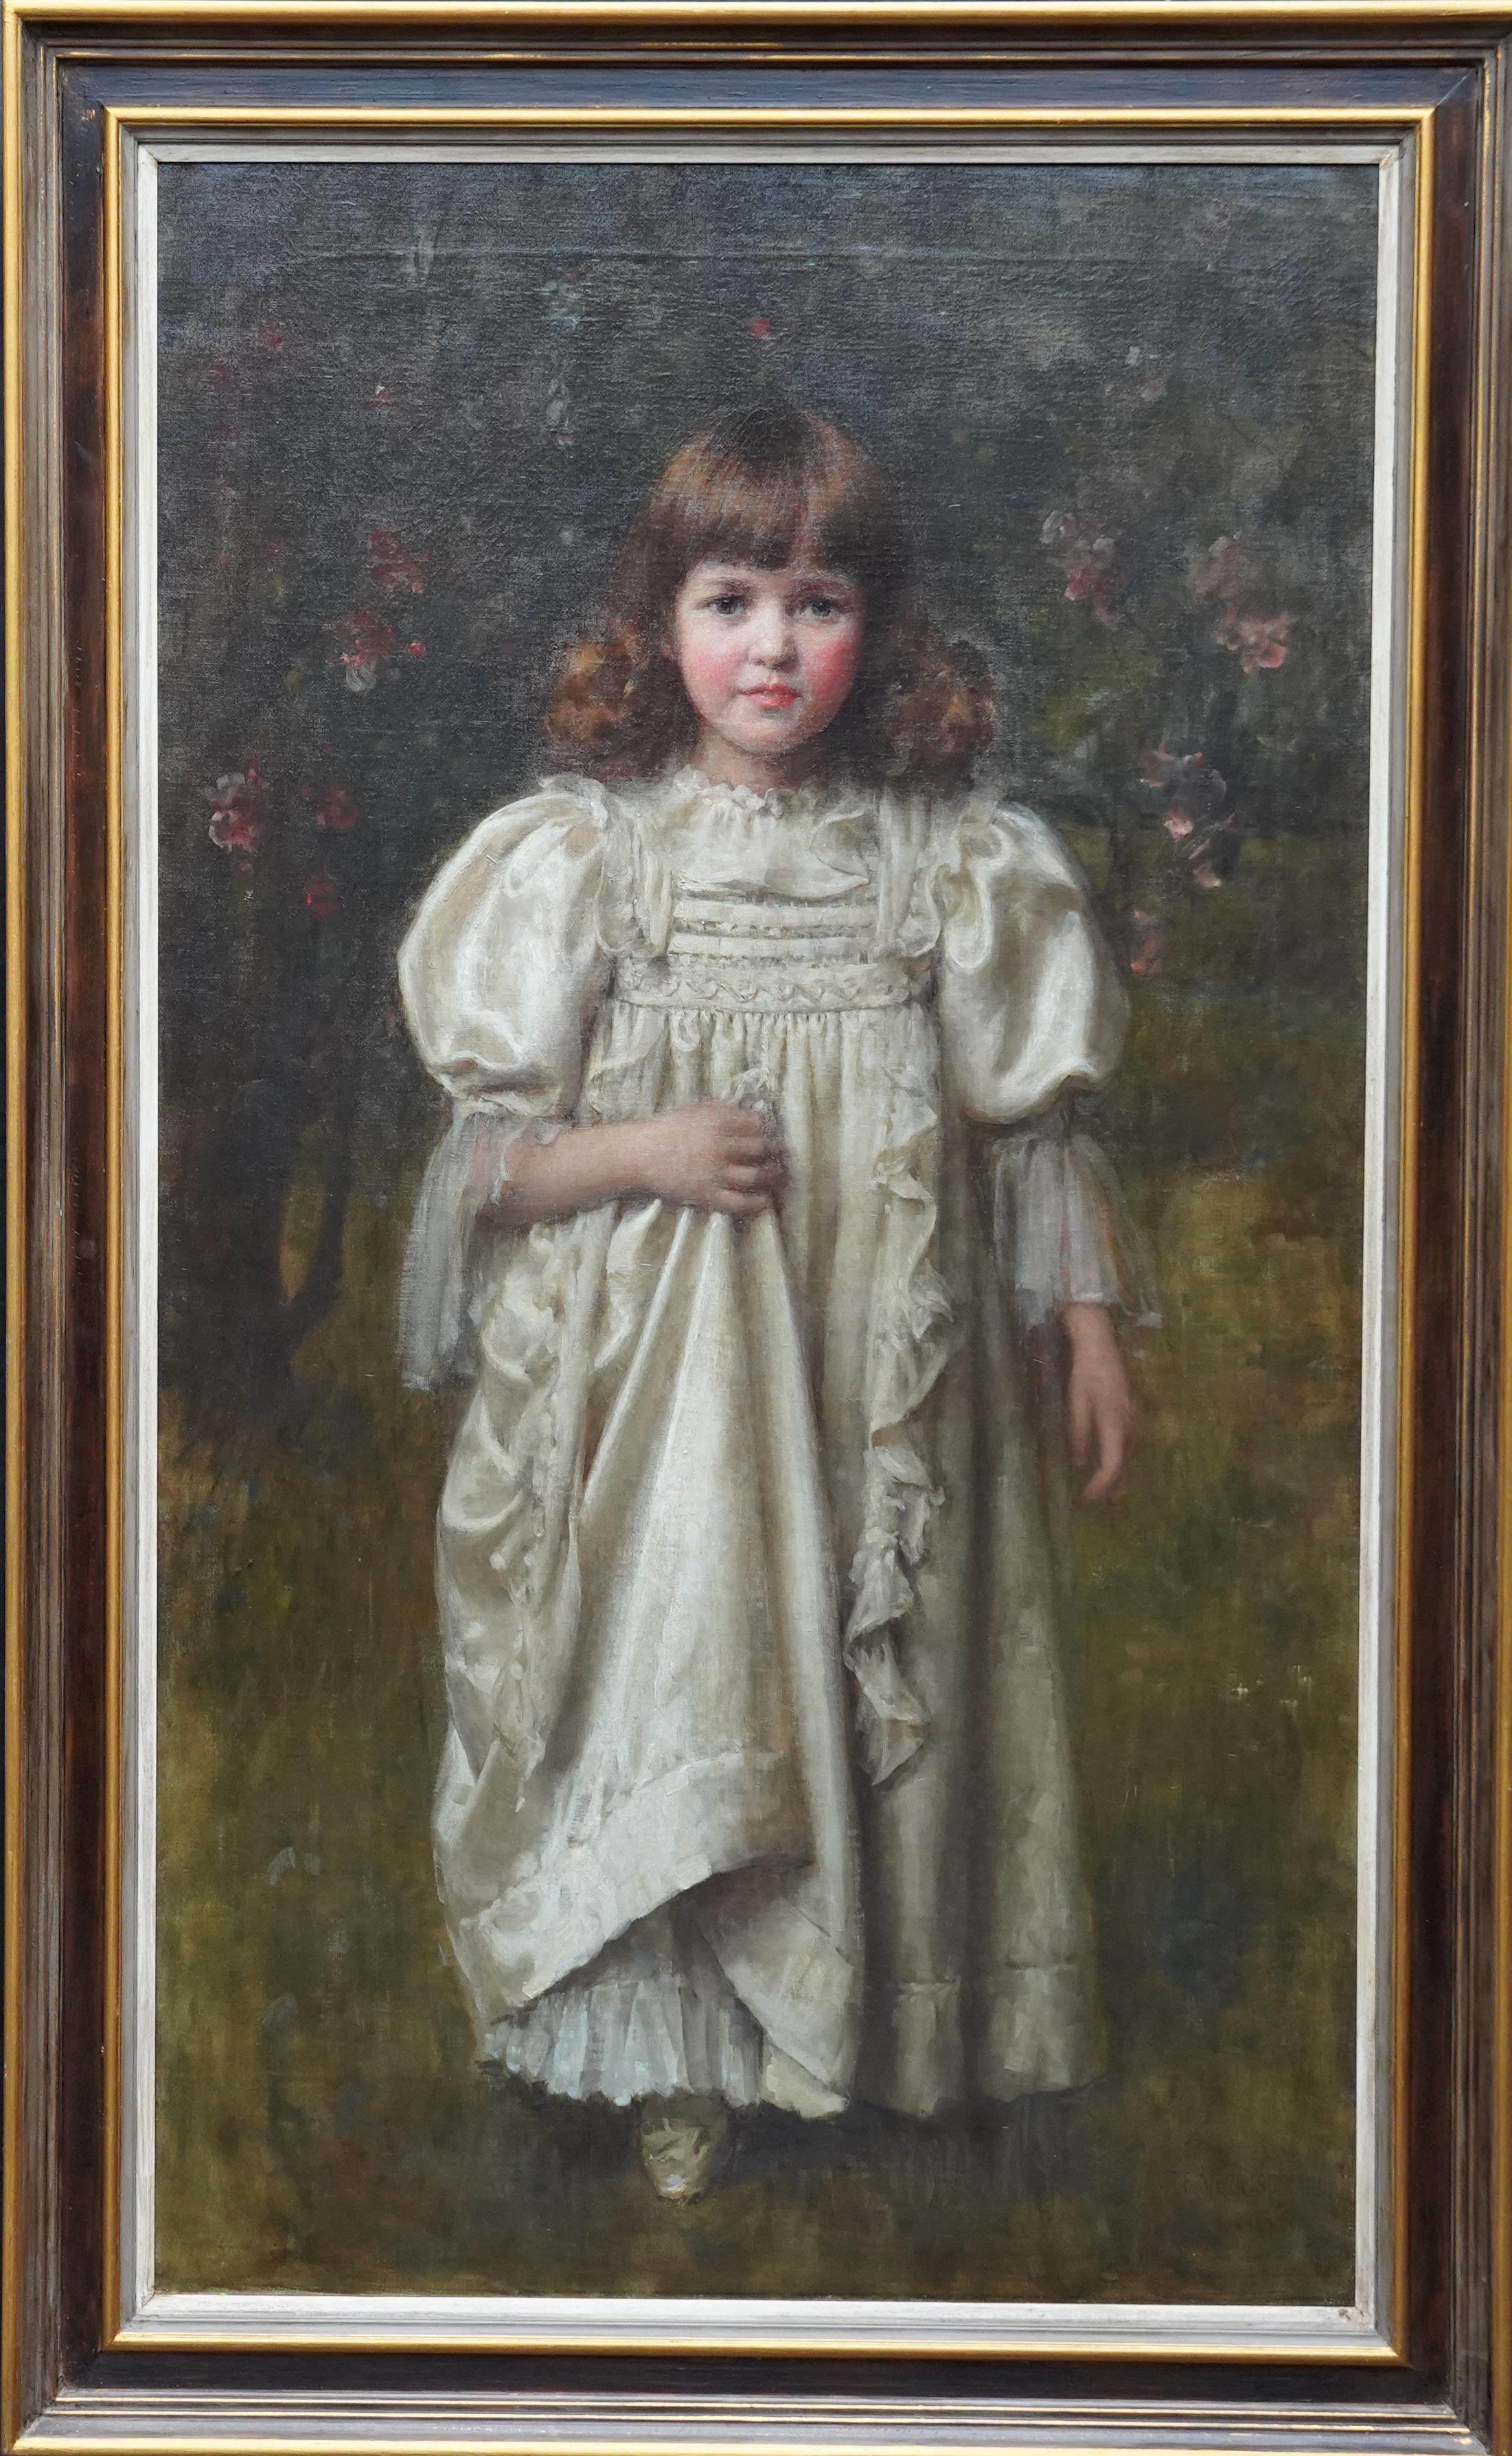 Portrait of a Young Girl in a White Dress - British Edwardian art oil painting